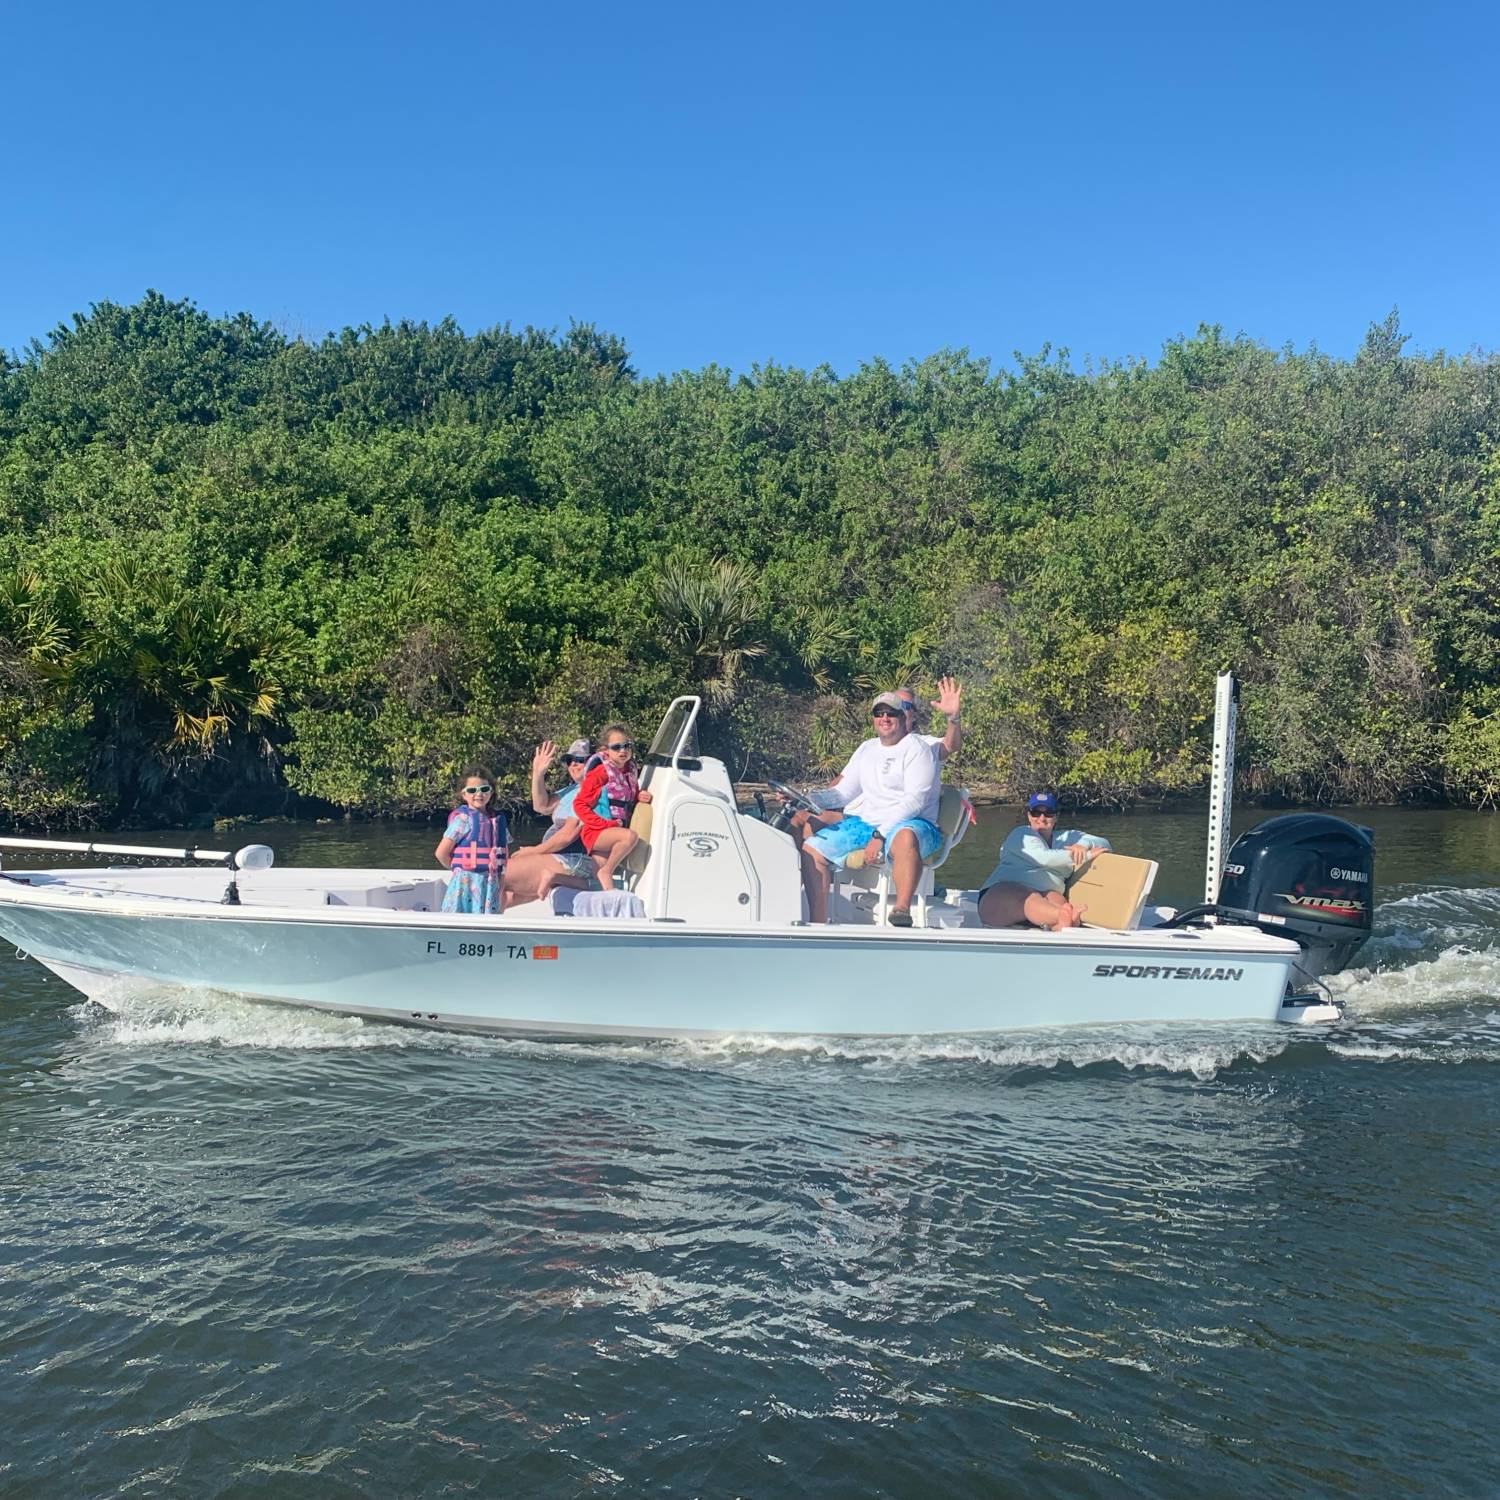 Title: Cruising Down The Creek - On board their Sportsman Tournament 234 Bay Boat - Location: Merritt Island, Florida. Participating in the Photo Contest #SportsmanMarch